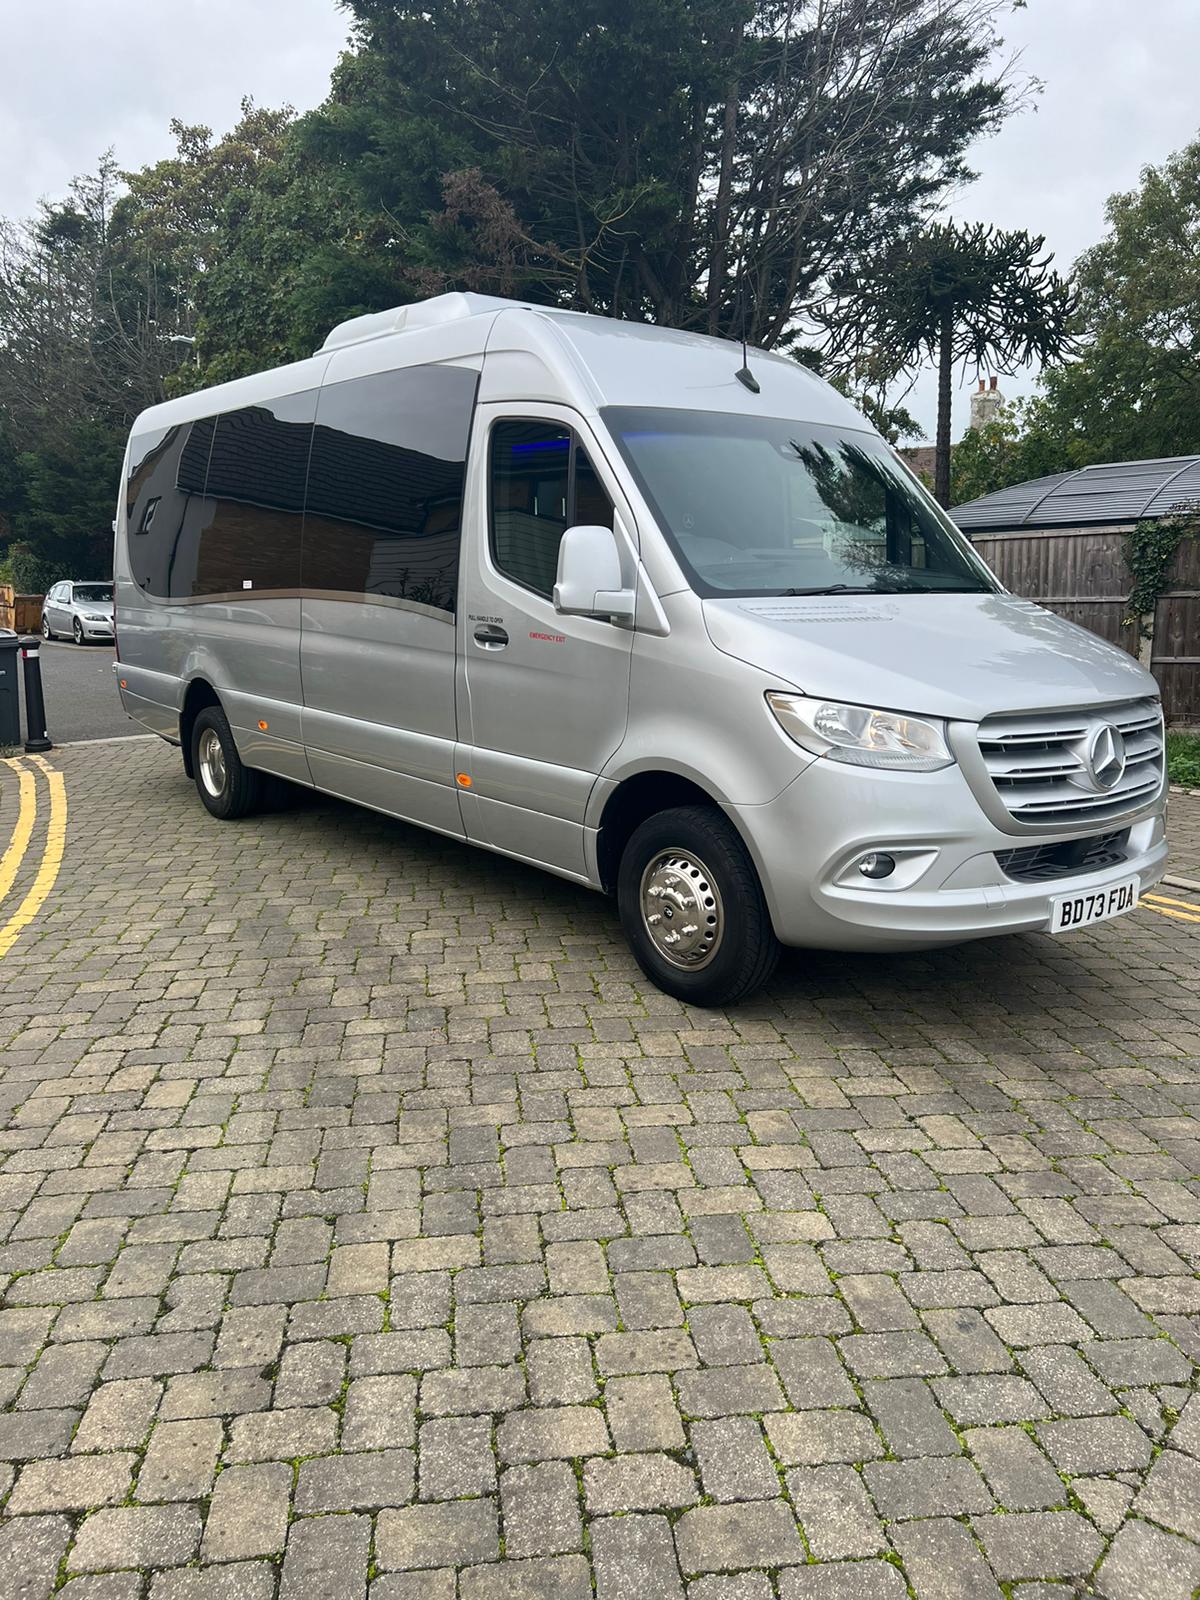 How to Find the Best 16 Seater Minibus Hire in Nottingham